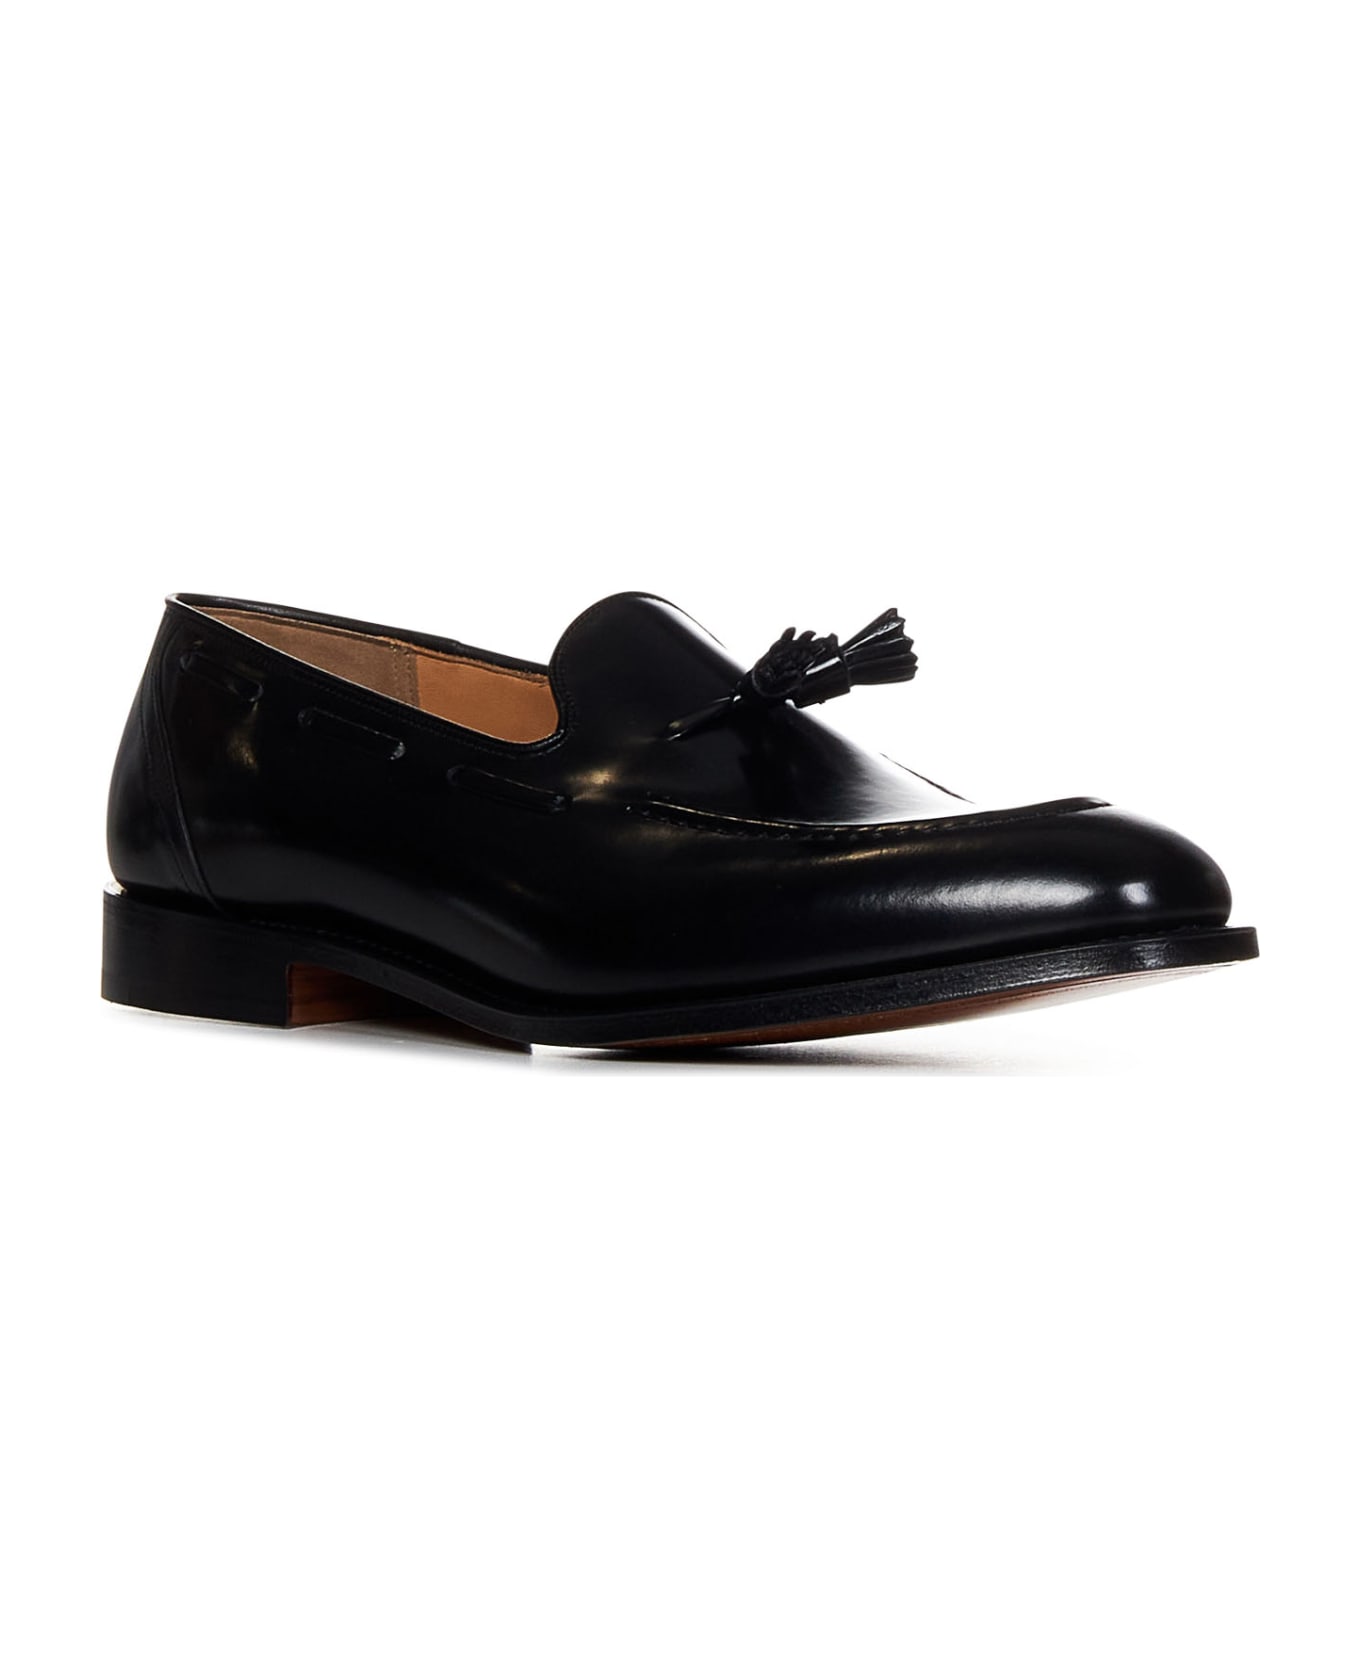 Church's Kingsley 2 Loafers - Black